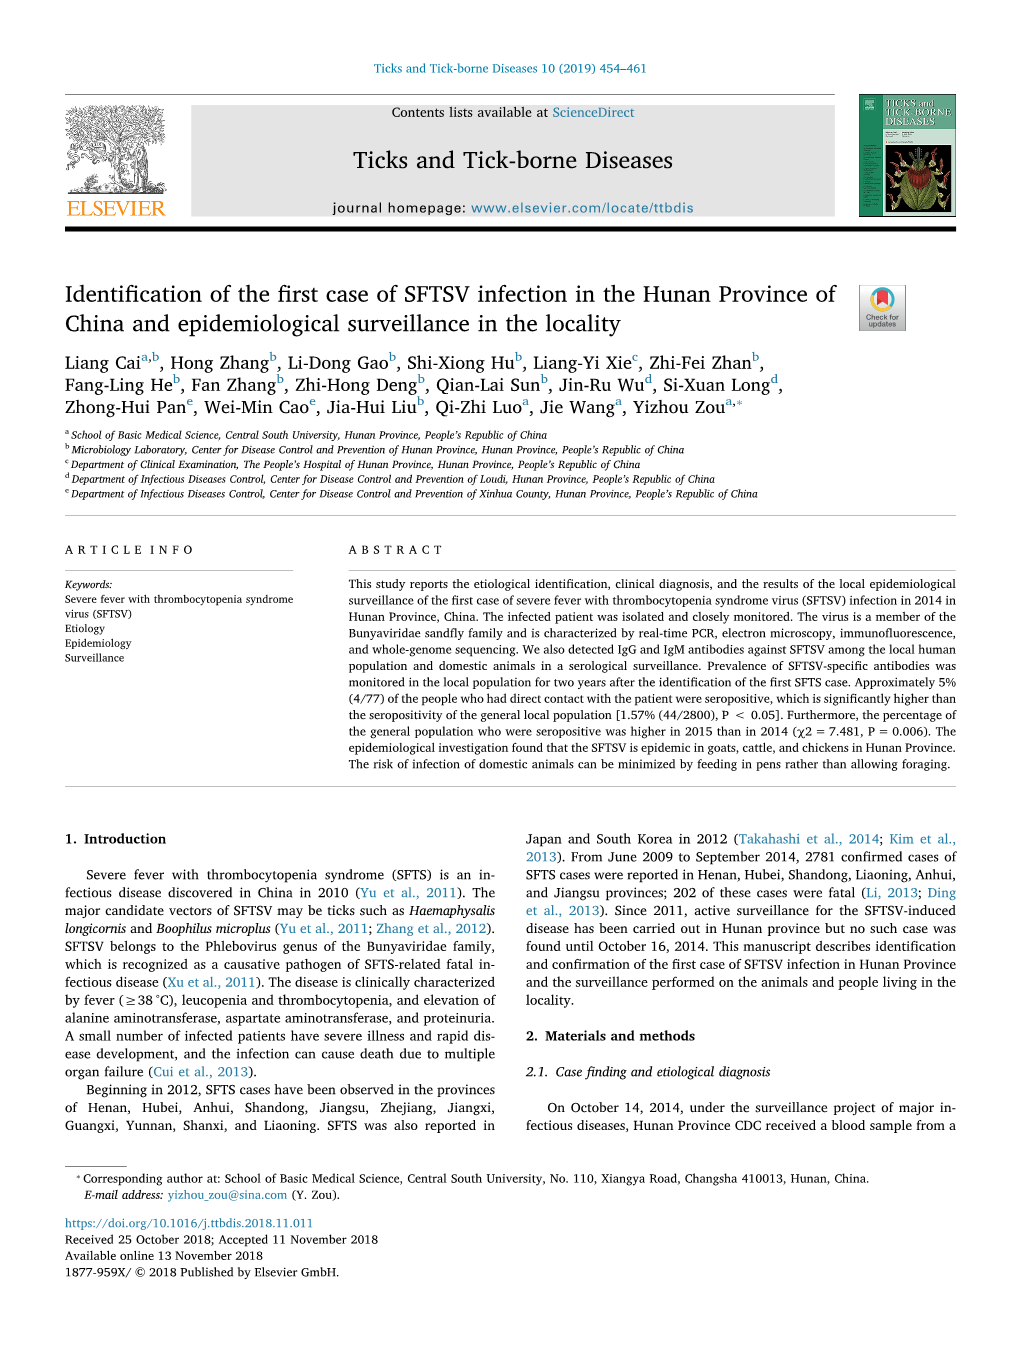 Identification of the First Case of SFTSV Infection in the Hunan Province of China and Epidemiological Surveillance in the Local